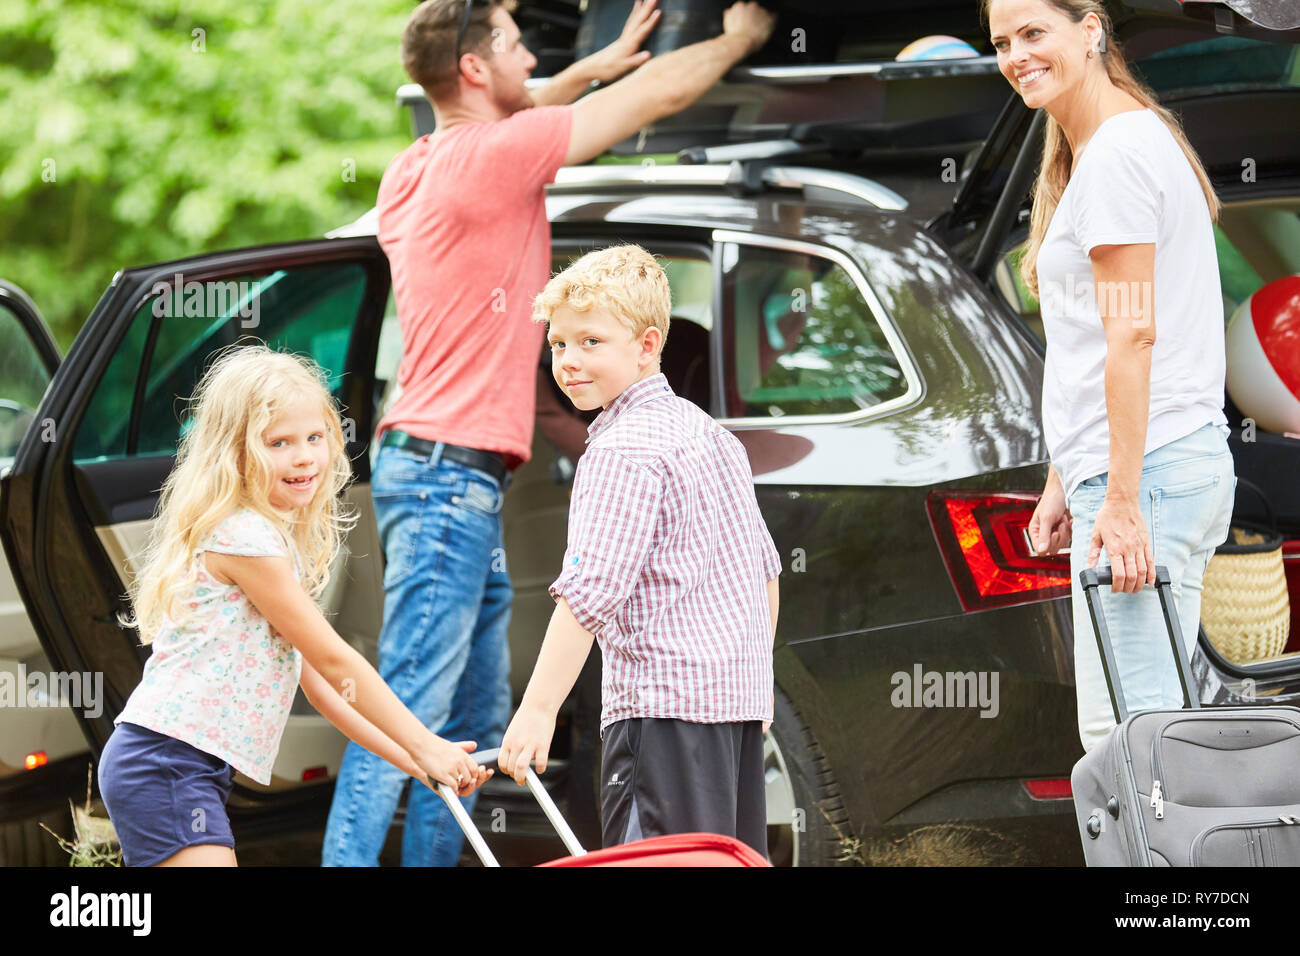 Family and children together at the suitcase packing at the car before the vacation trip Stock Photo